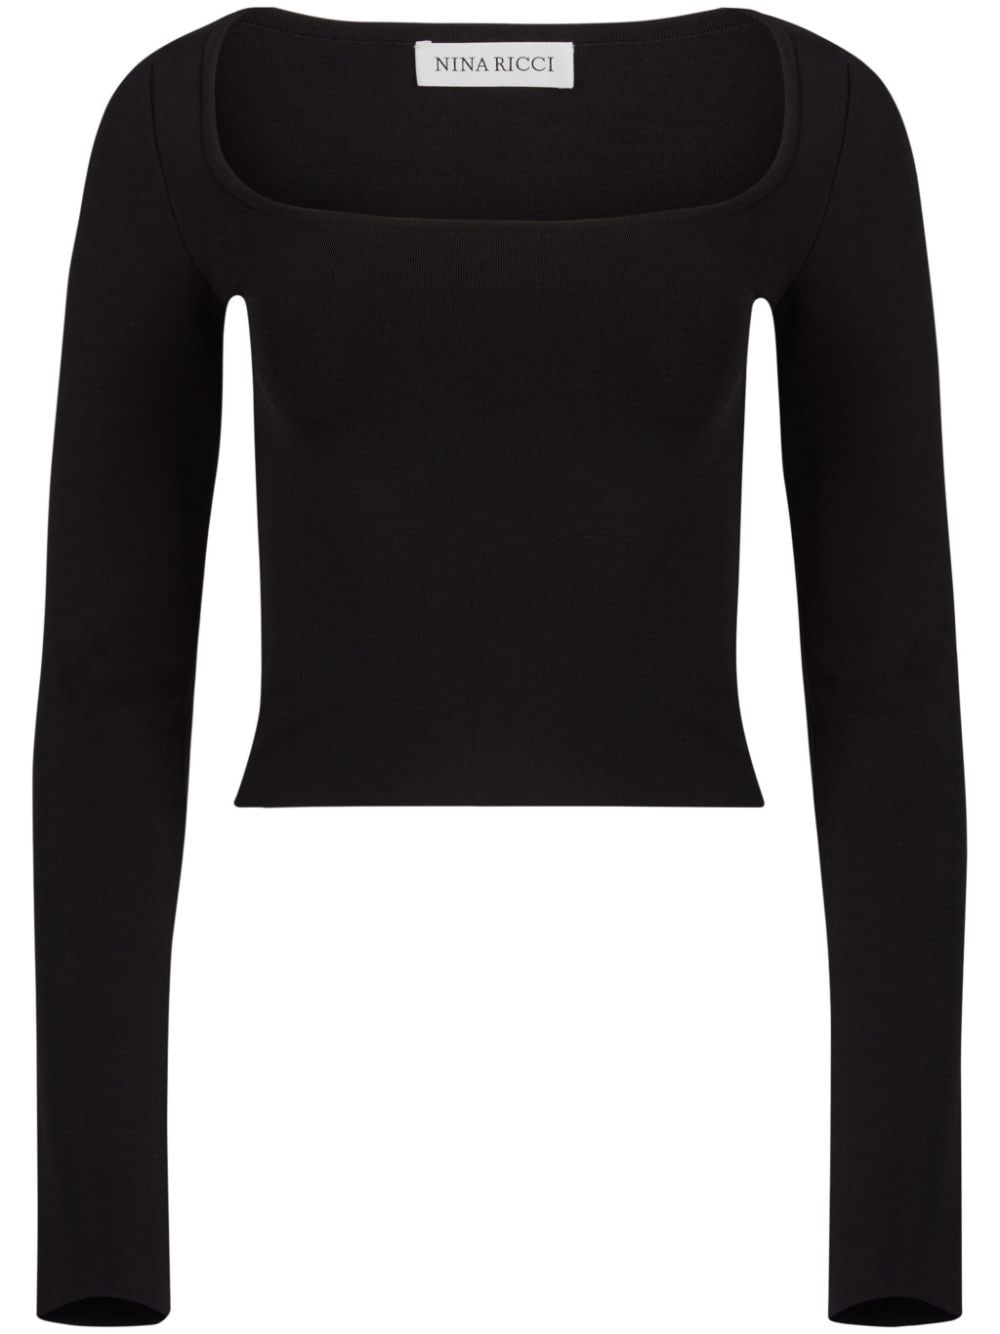 square-neck jersey top - 1